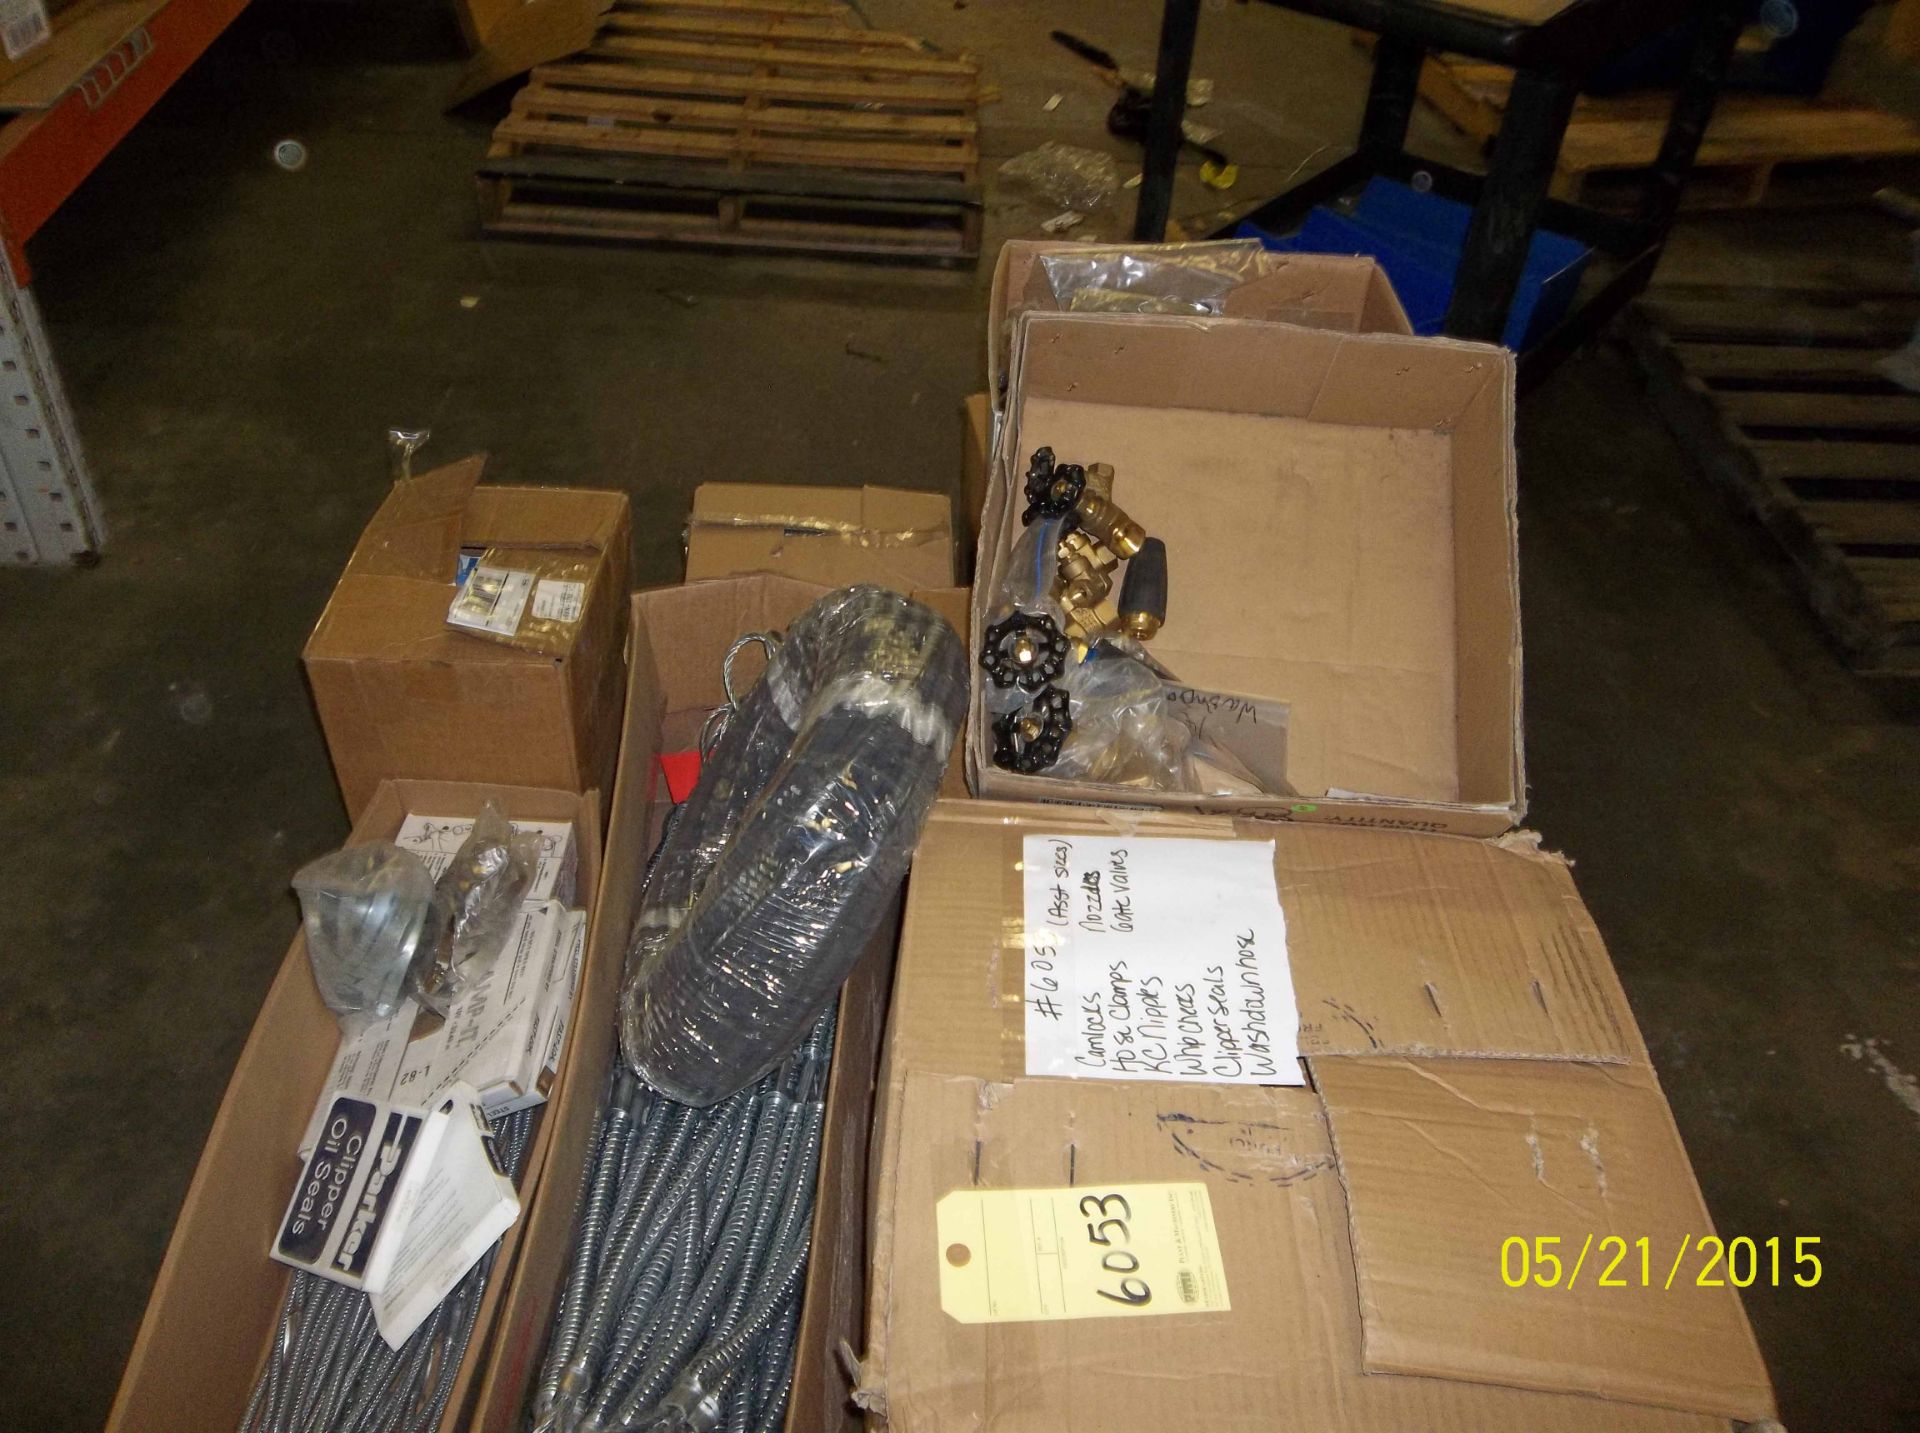 LOT CONSISTING OF CAMLOCKS, HOSE CLAMPS, KC NIPPLES, WHIP CHECKS, CLIPPER SEALS, WASH DOWN HOSE,